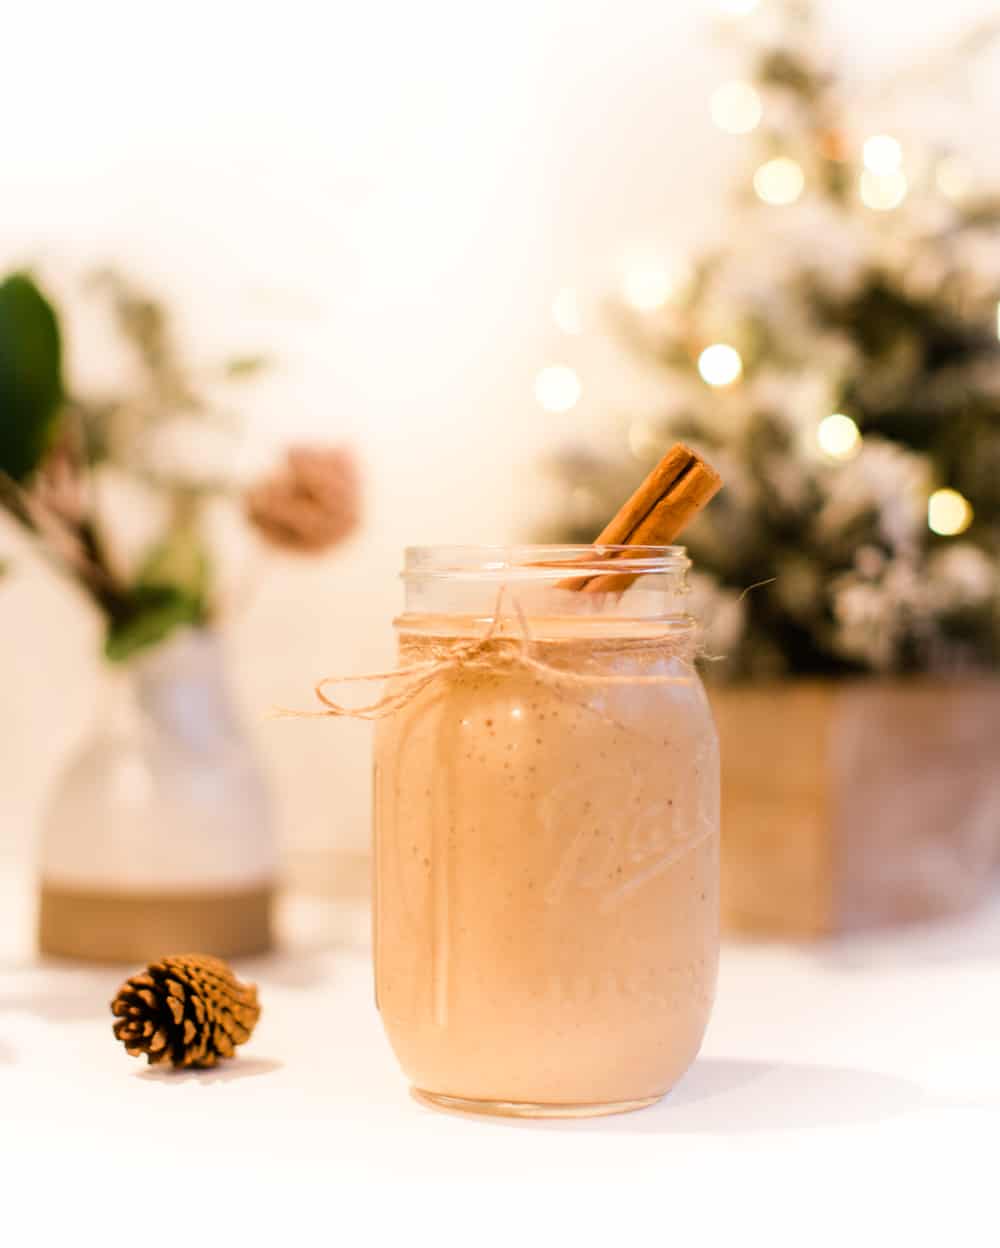 Gingerbread Smoothie Recipe That's Vegan Healthy & Delicious!